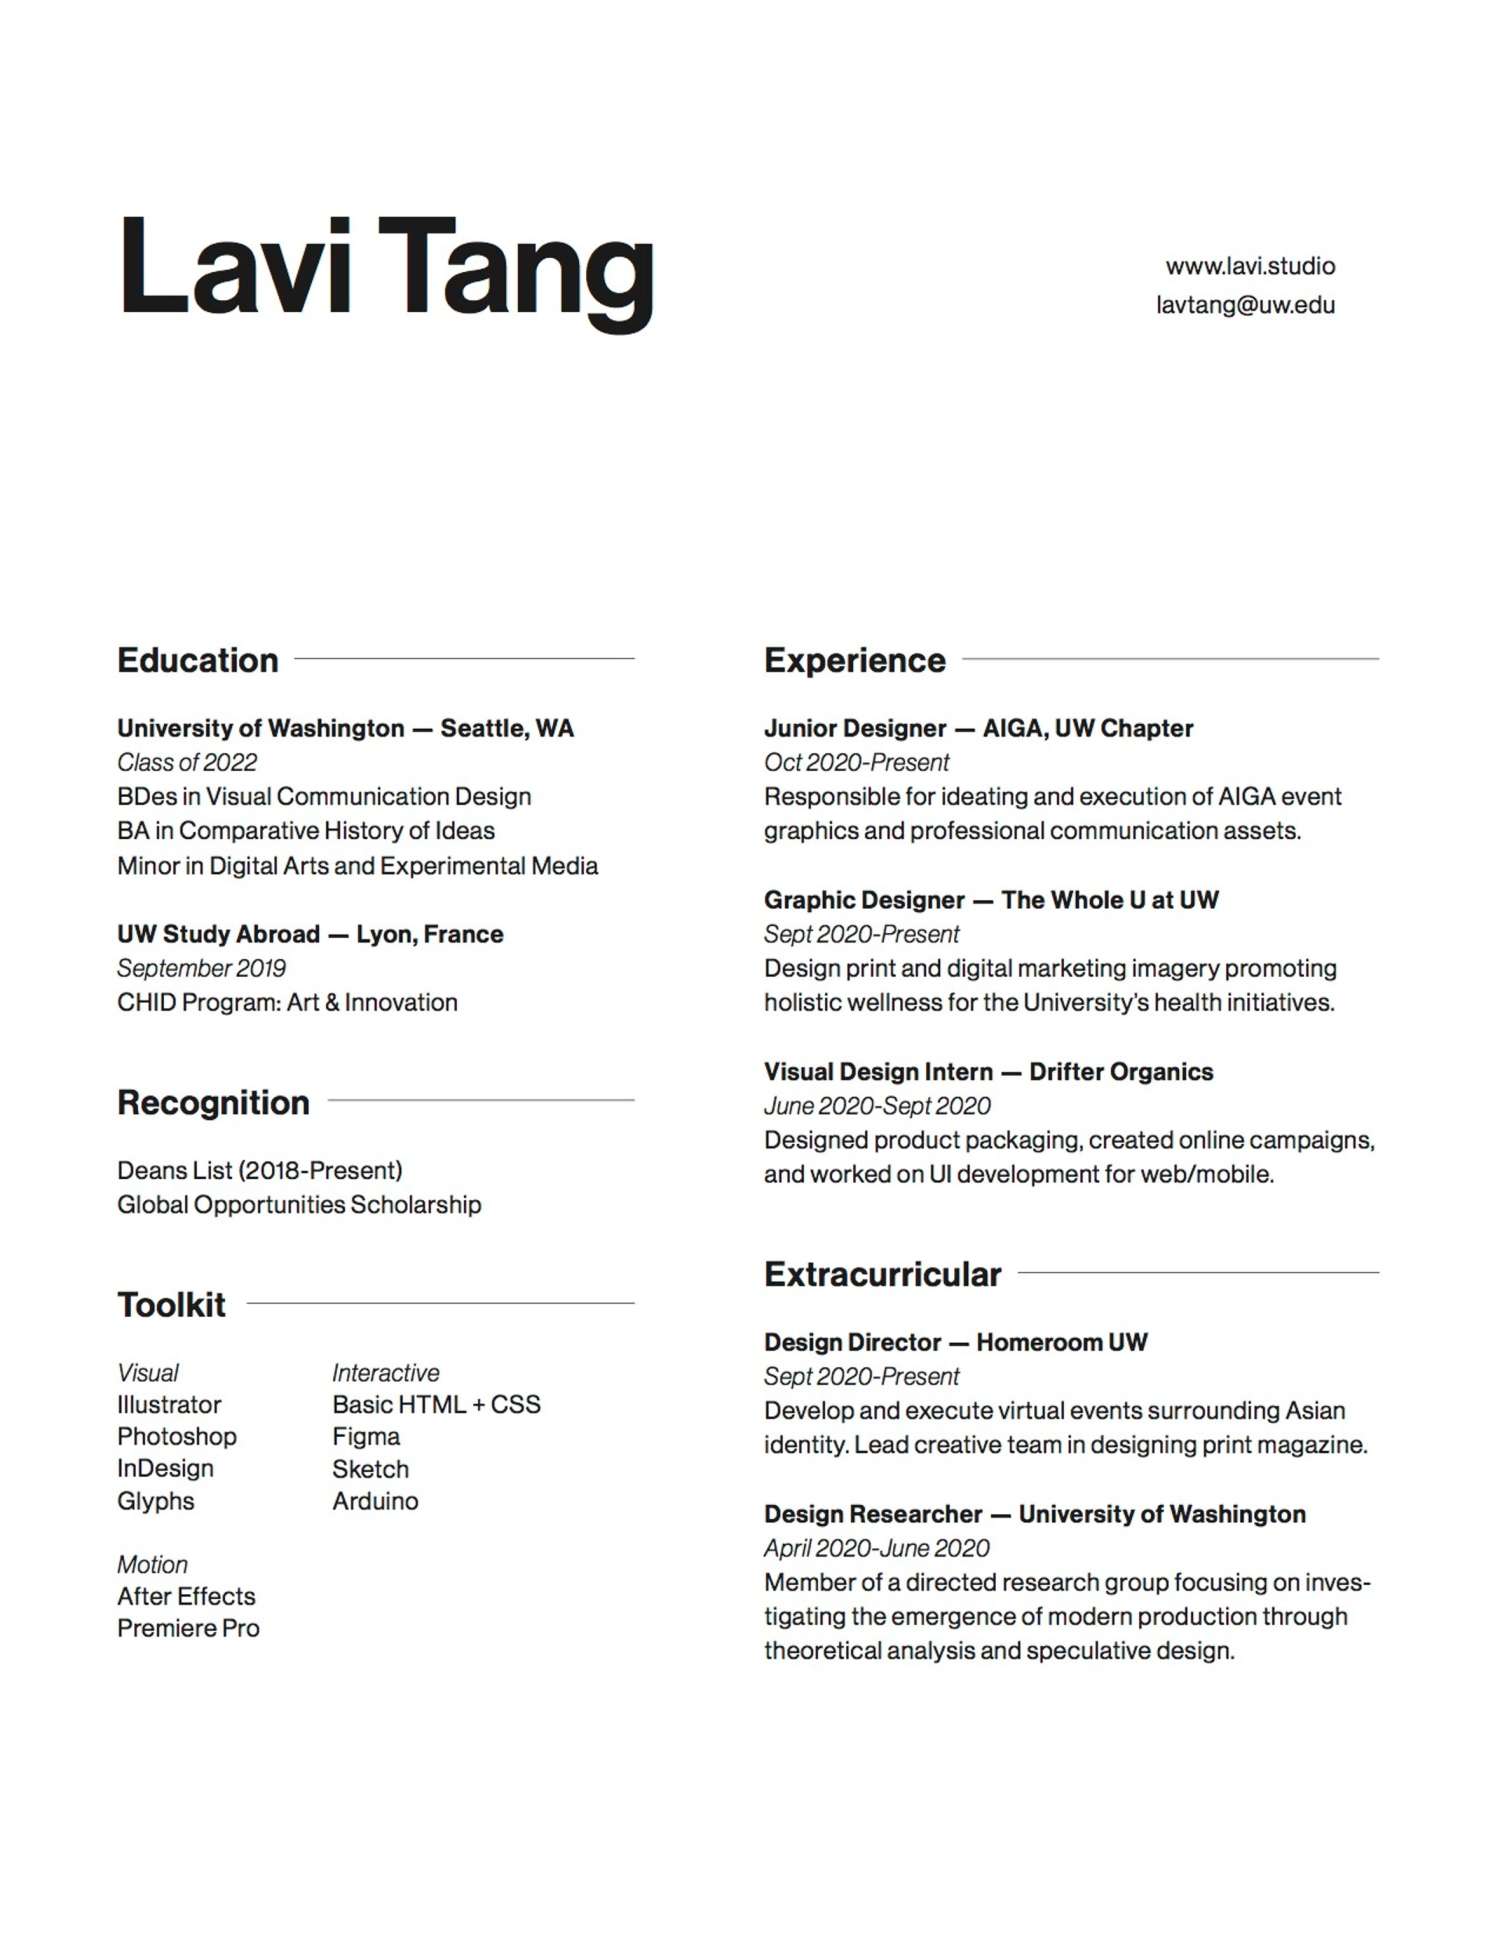 Lavi Tang current student